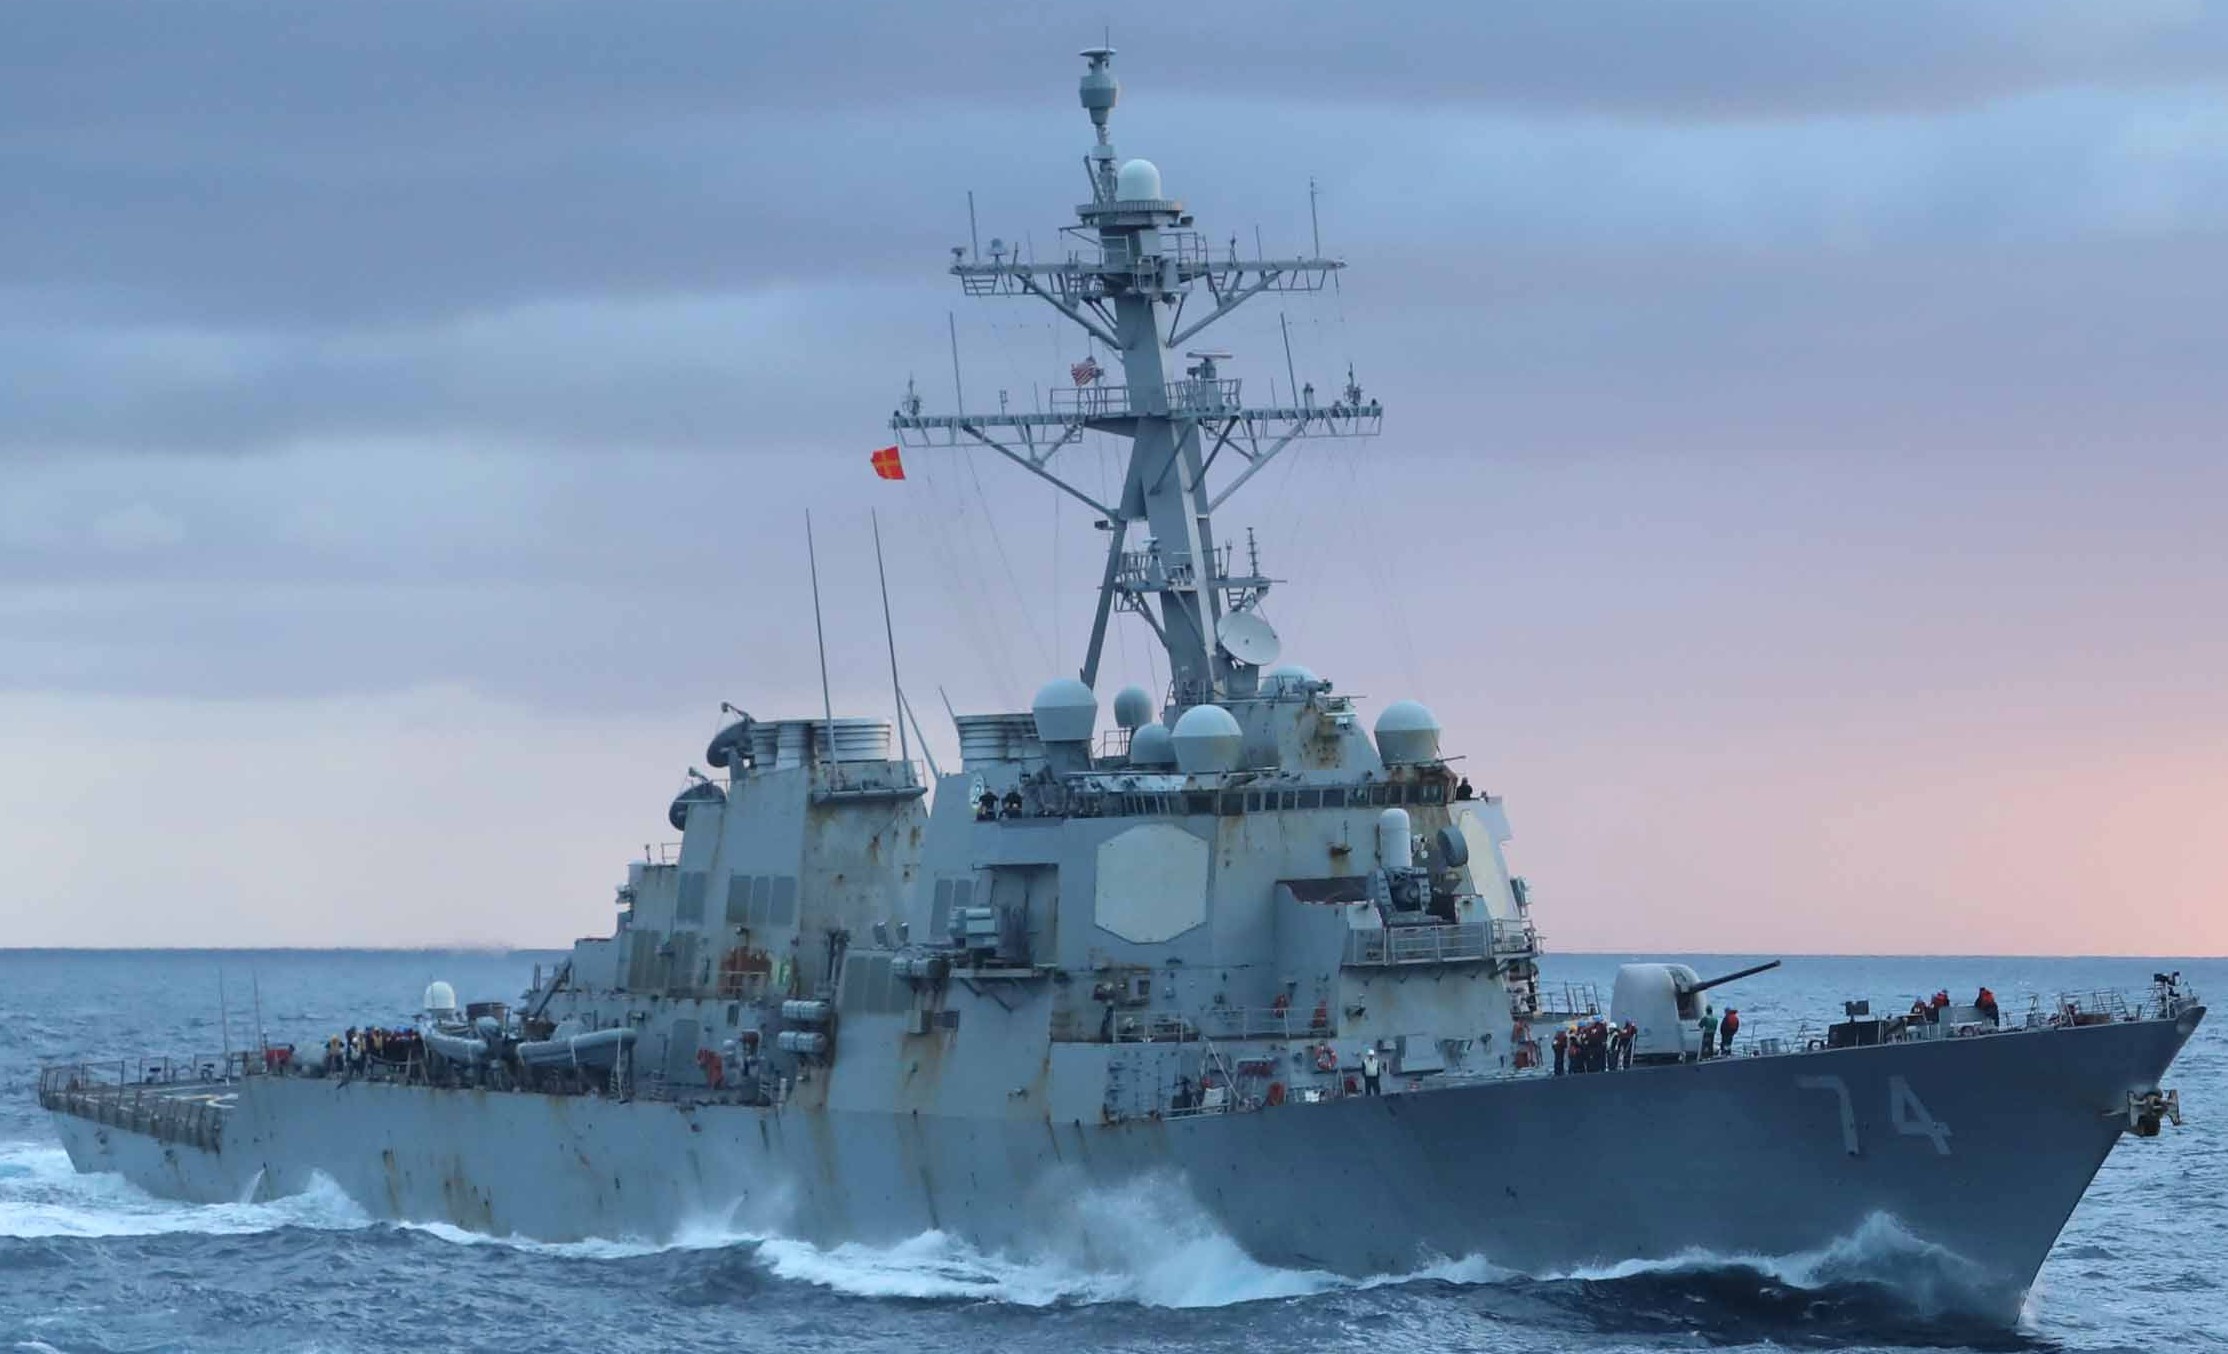 ddg-74 uss mcfaul guided missile destroyer arleigh burke class aegis us navy 75